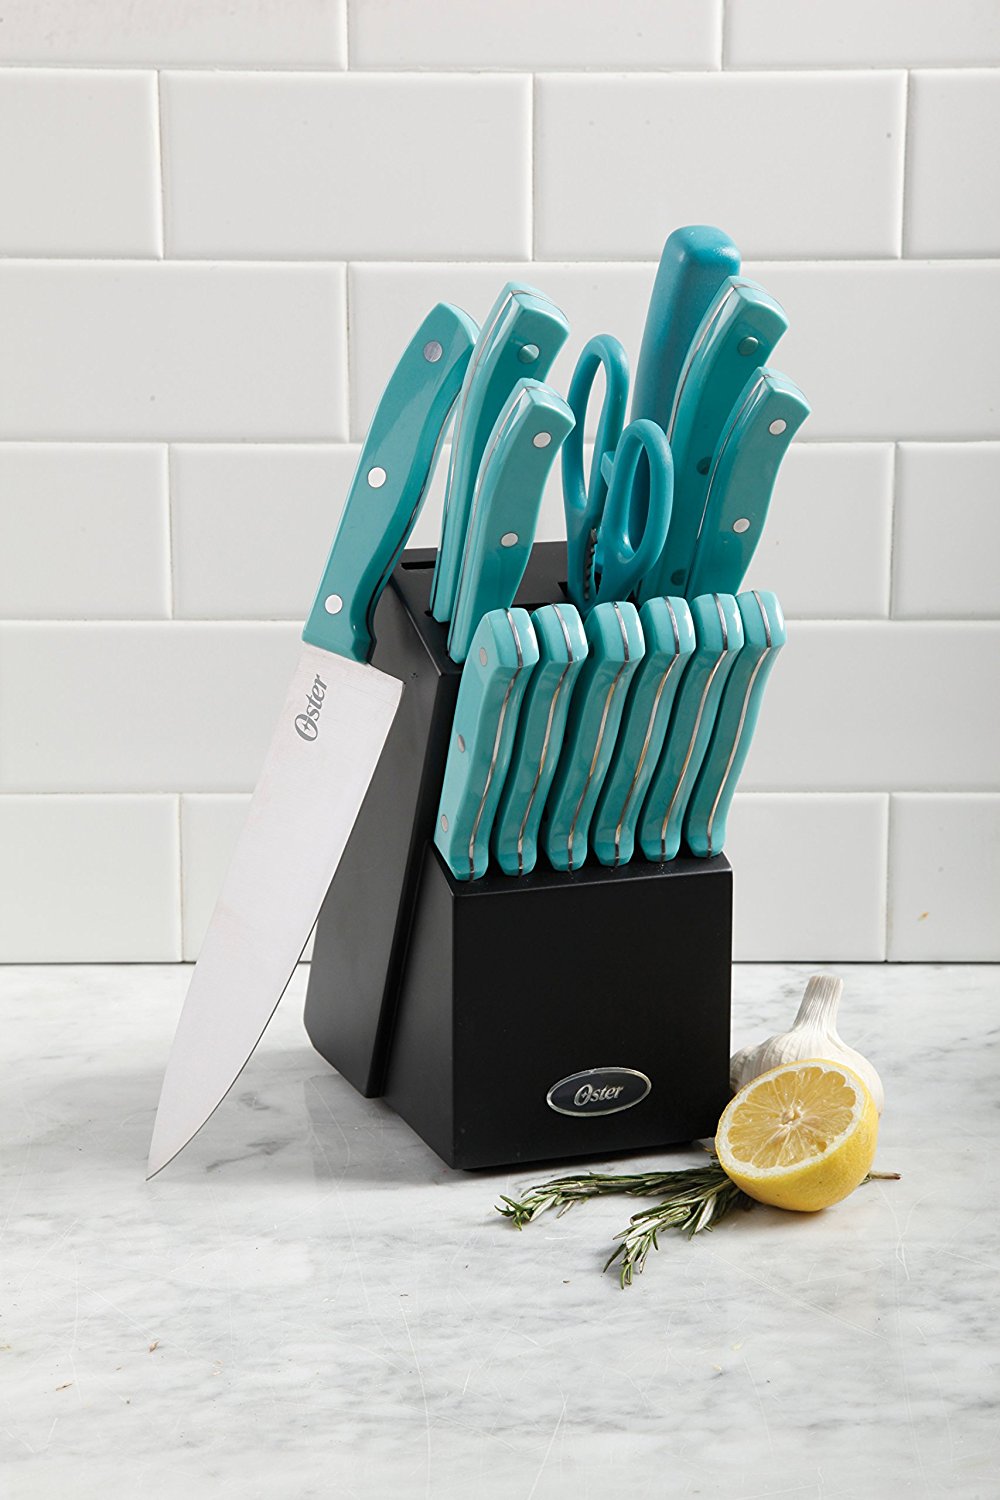 https://everythingturquoise.com/wp-content/uploads/2017/12/Turquoise-Oster-Evansville-14-Piece-Cutlery-Set.jpg